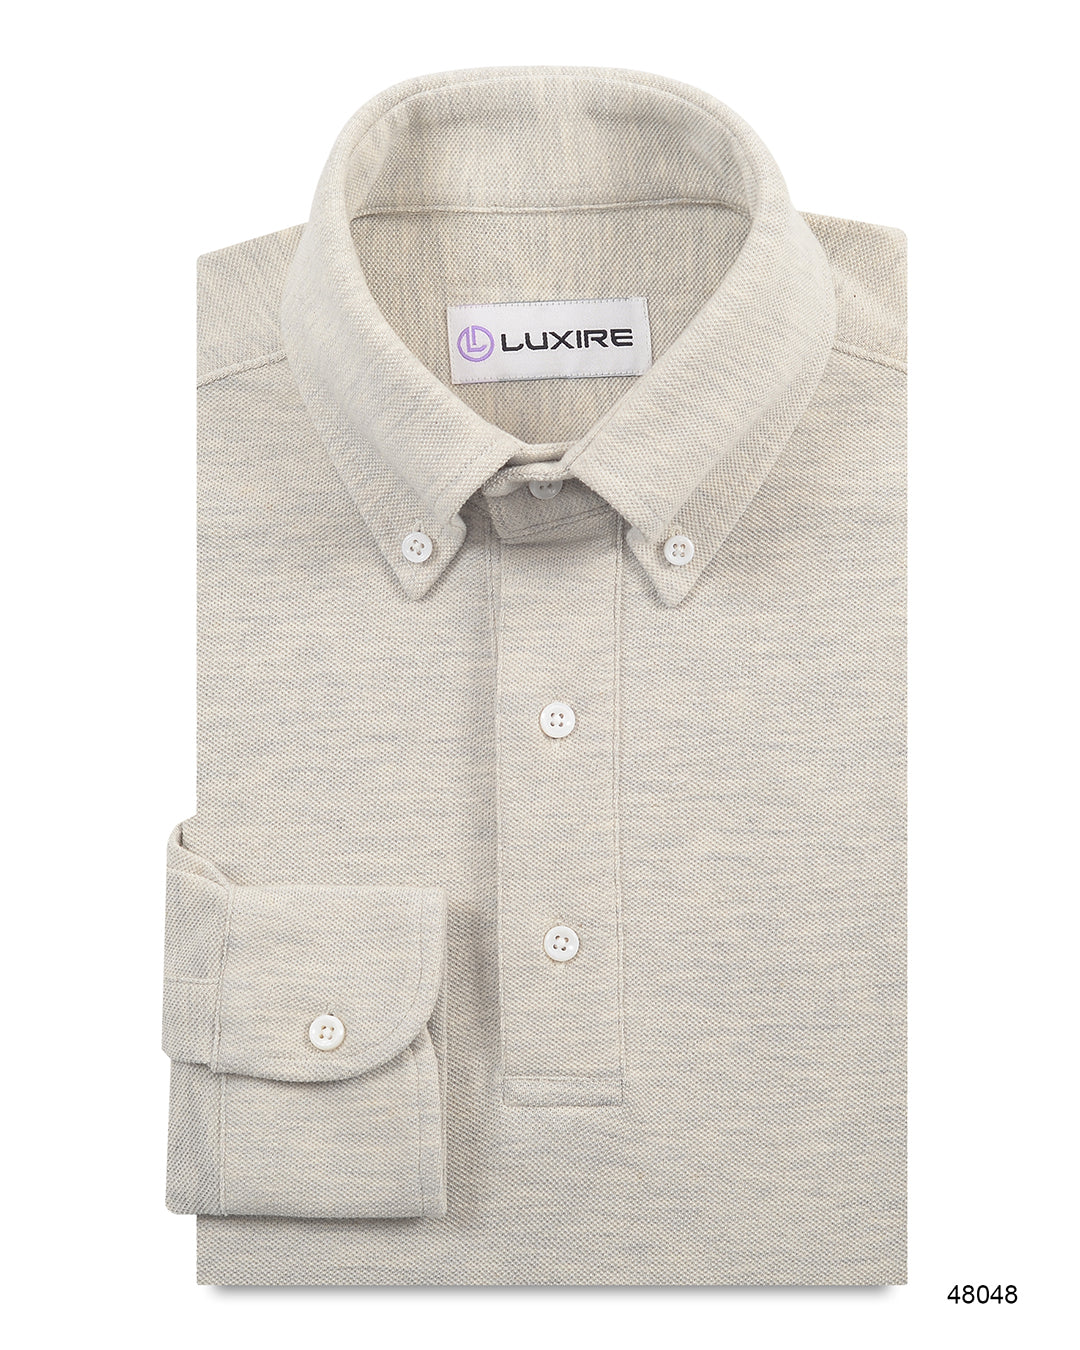 Front of the custom oxford polo shirt for men by Luxire in cloud grey